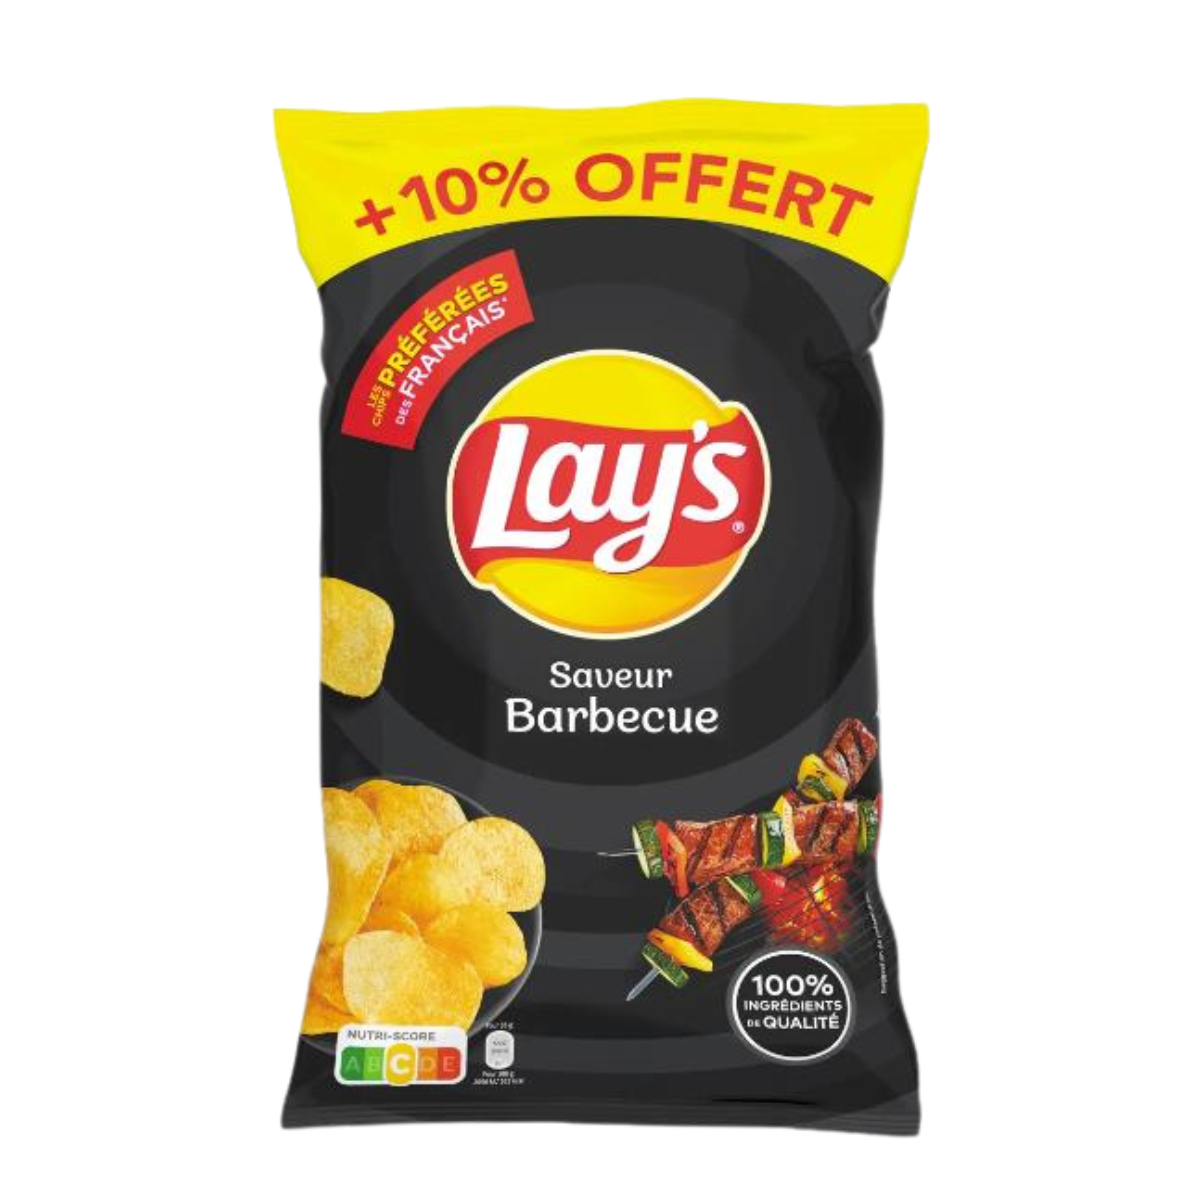 Chips Lays saveur Barbecue